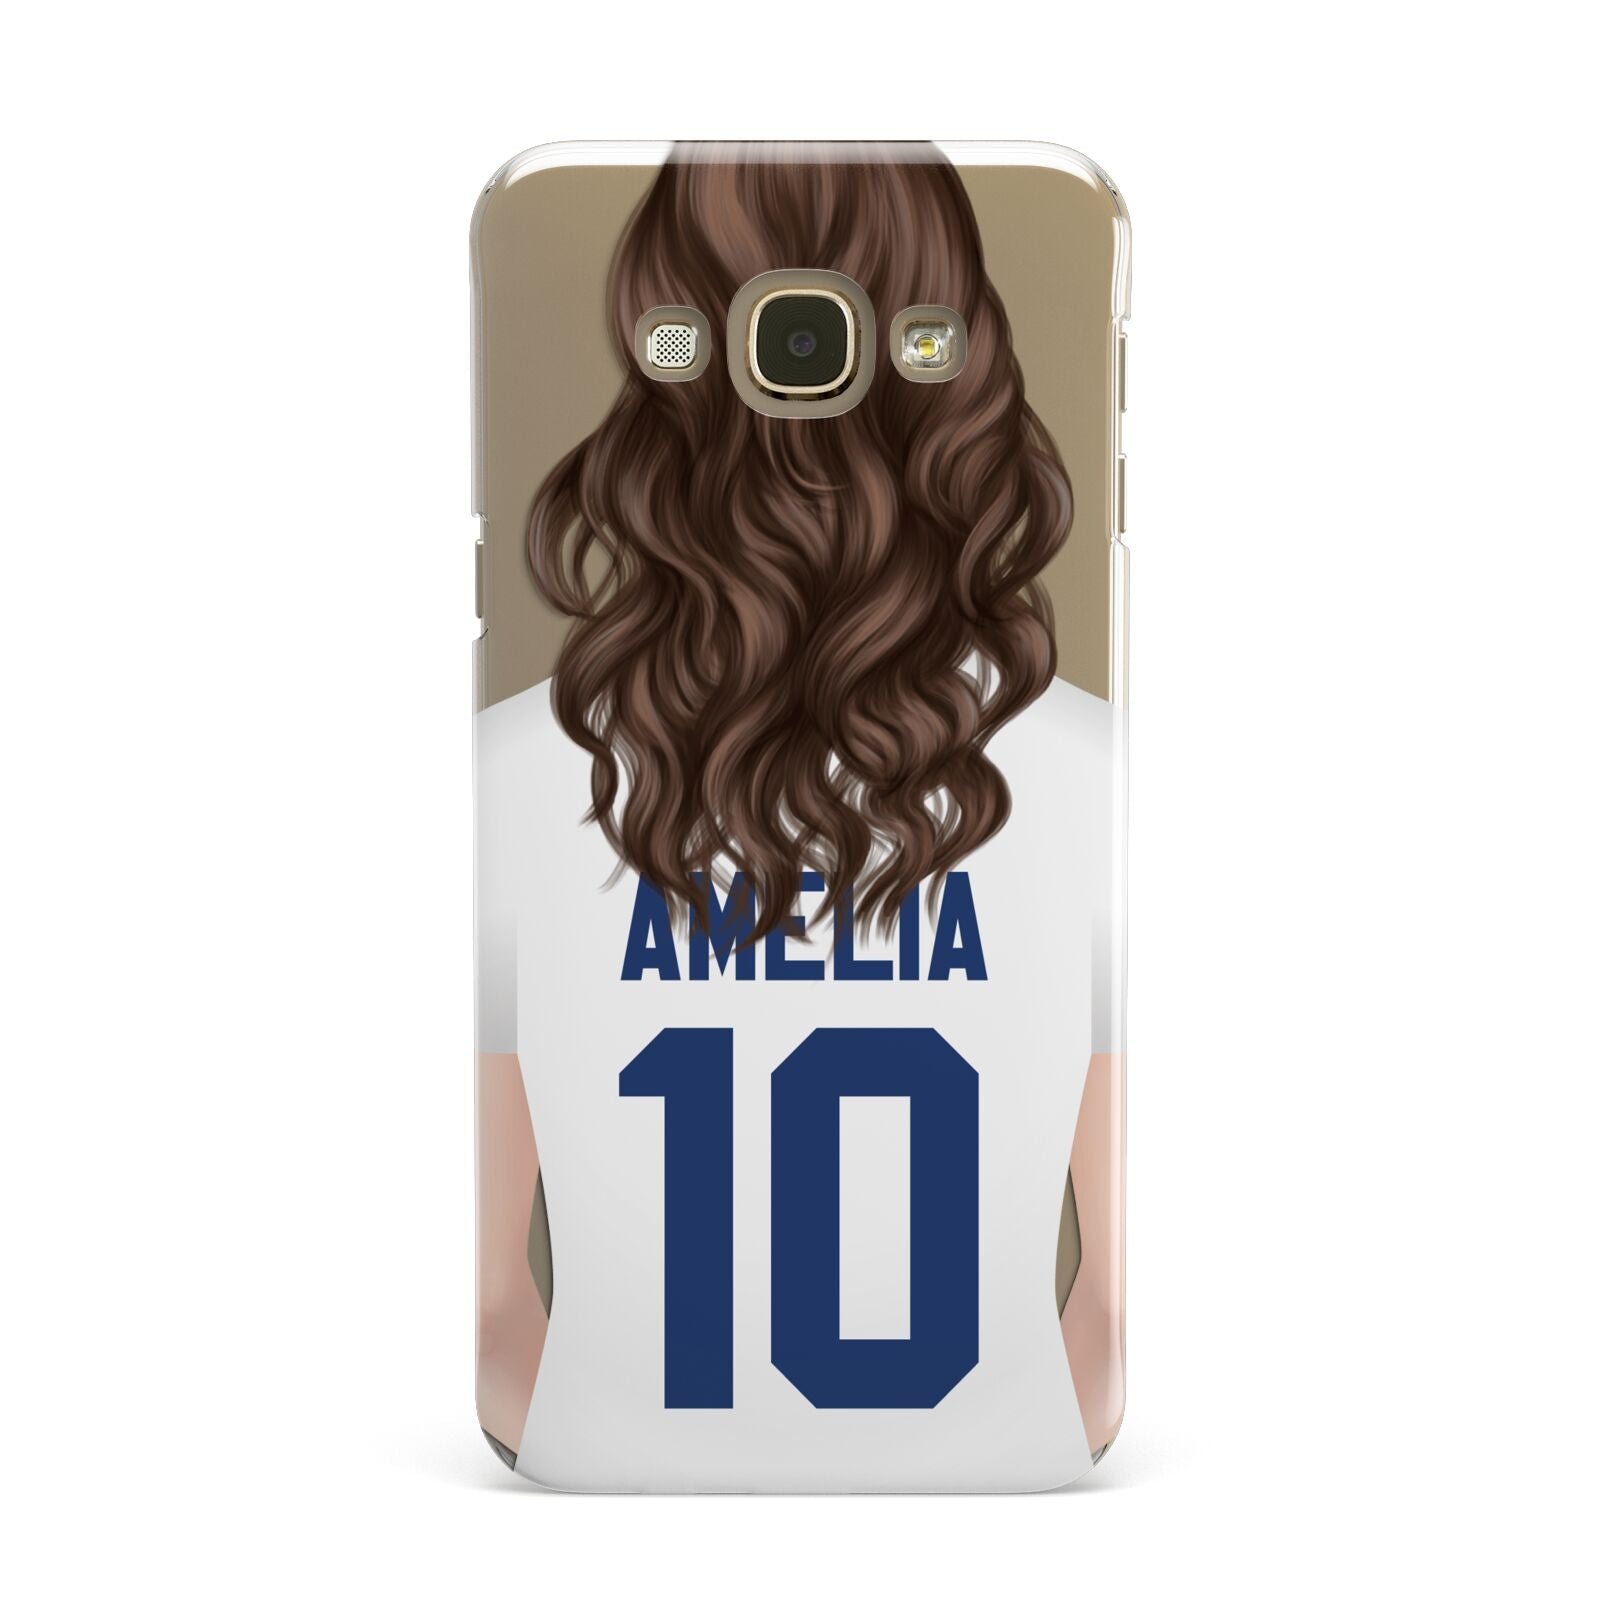 Womens Footballer Personalised Samsung Galaxy A8 Case